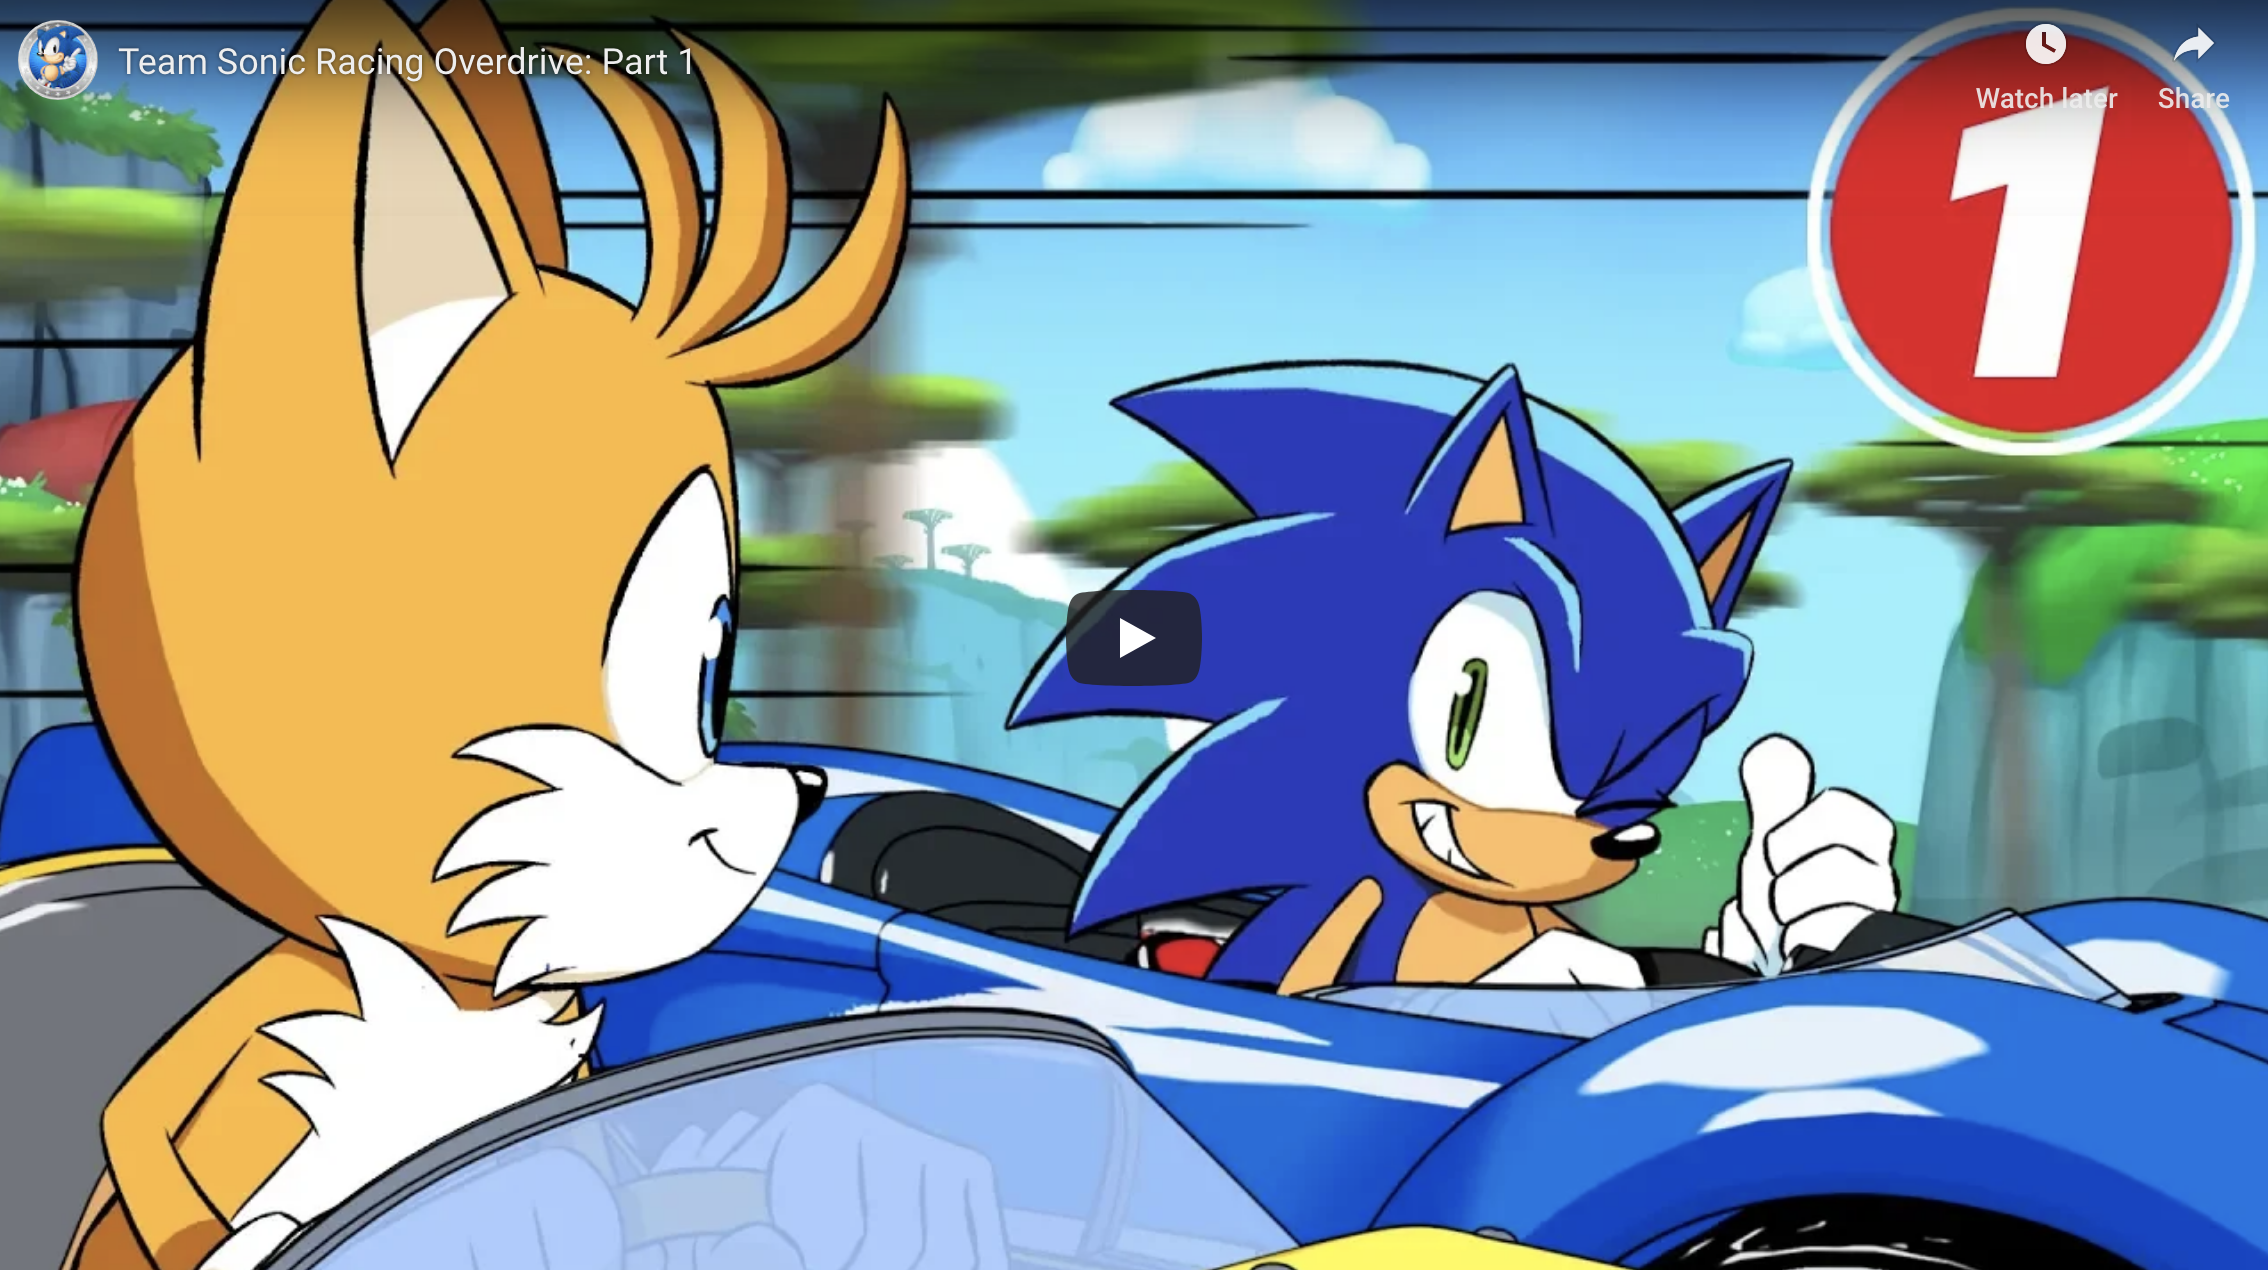 Sonic @ SXSW: Team Sonic Racing: Overdrive 2-part animation announced – watch part 1 ...2268 x 1270